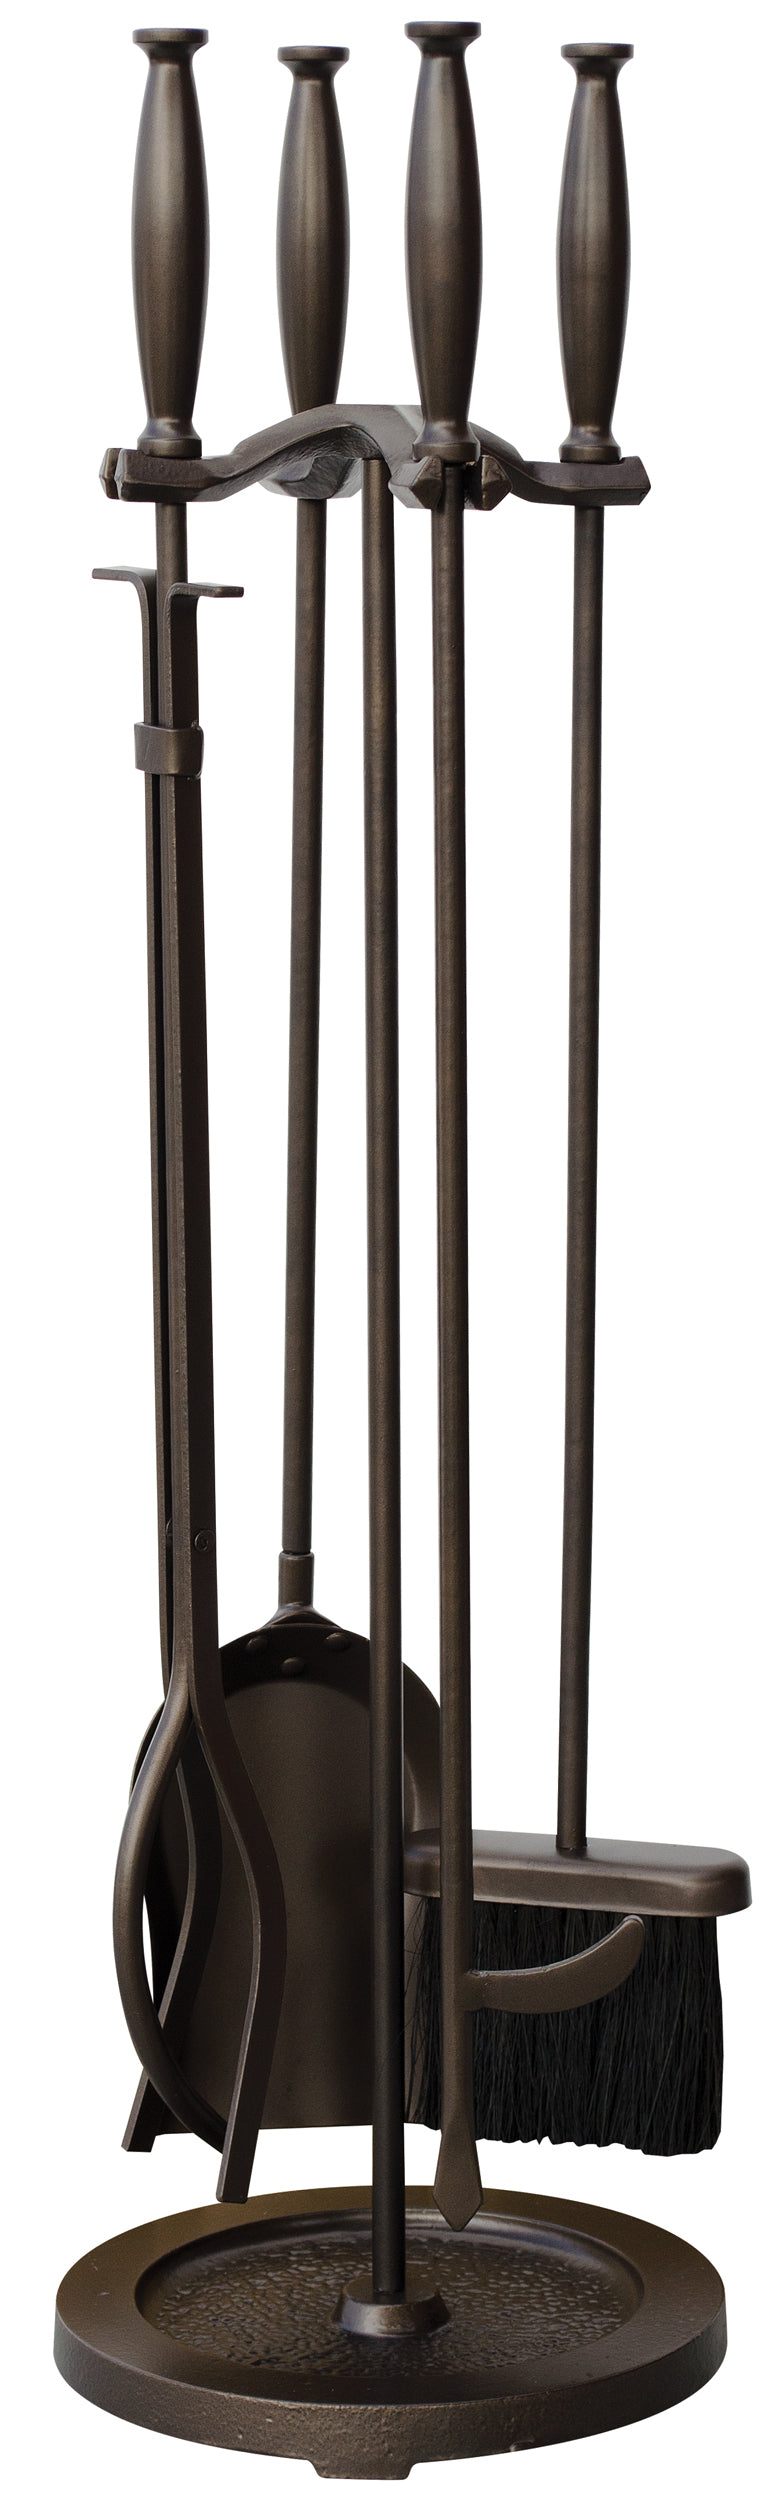 UniFlame 5 Piece Bronze Finish Fireset with Cylinder Handles